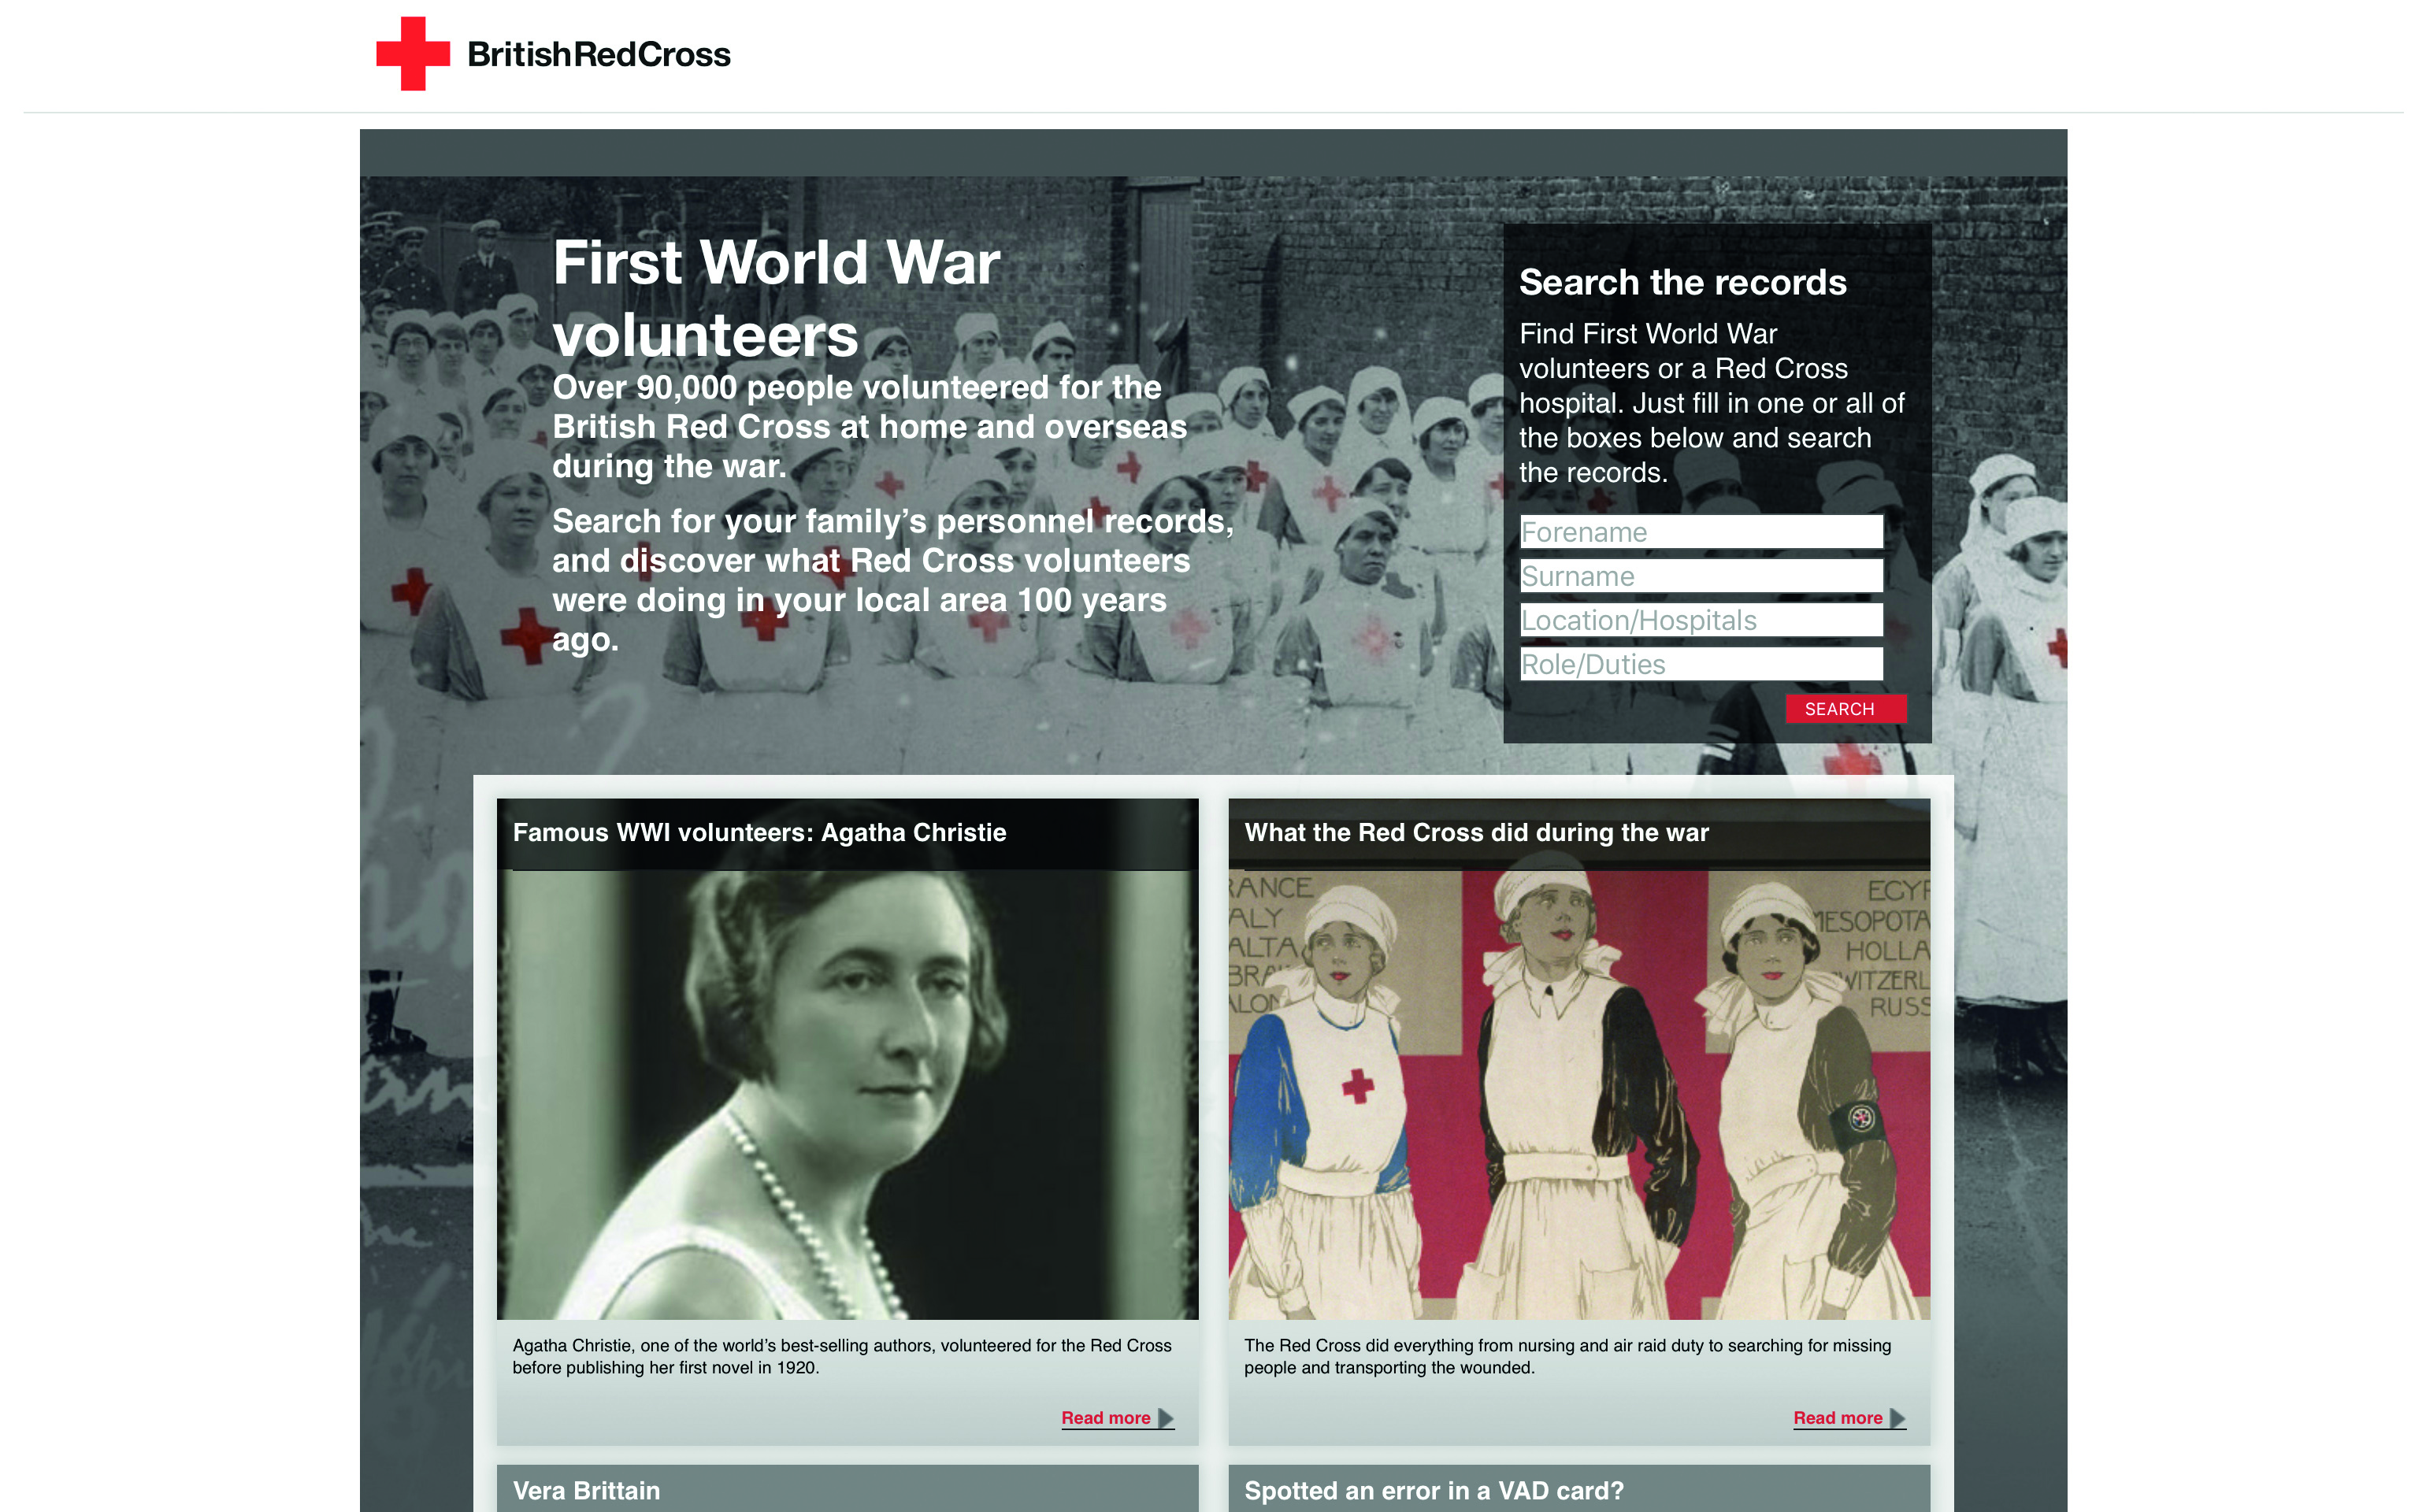 How did 'British Red Cross' volunteers help during the First World War? 